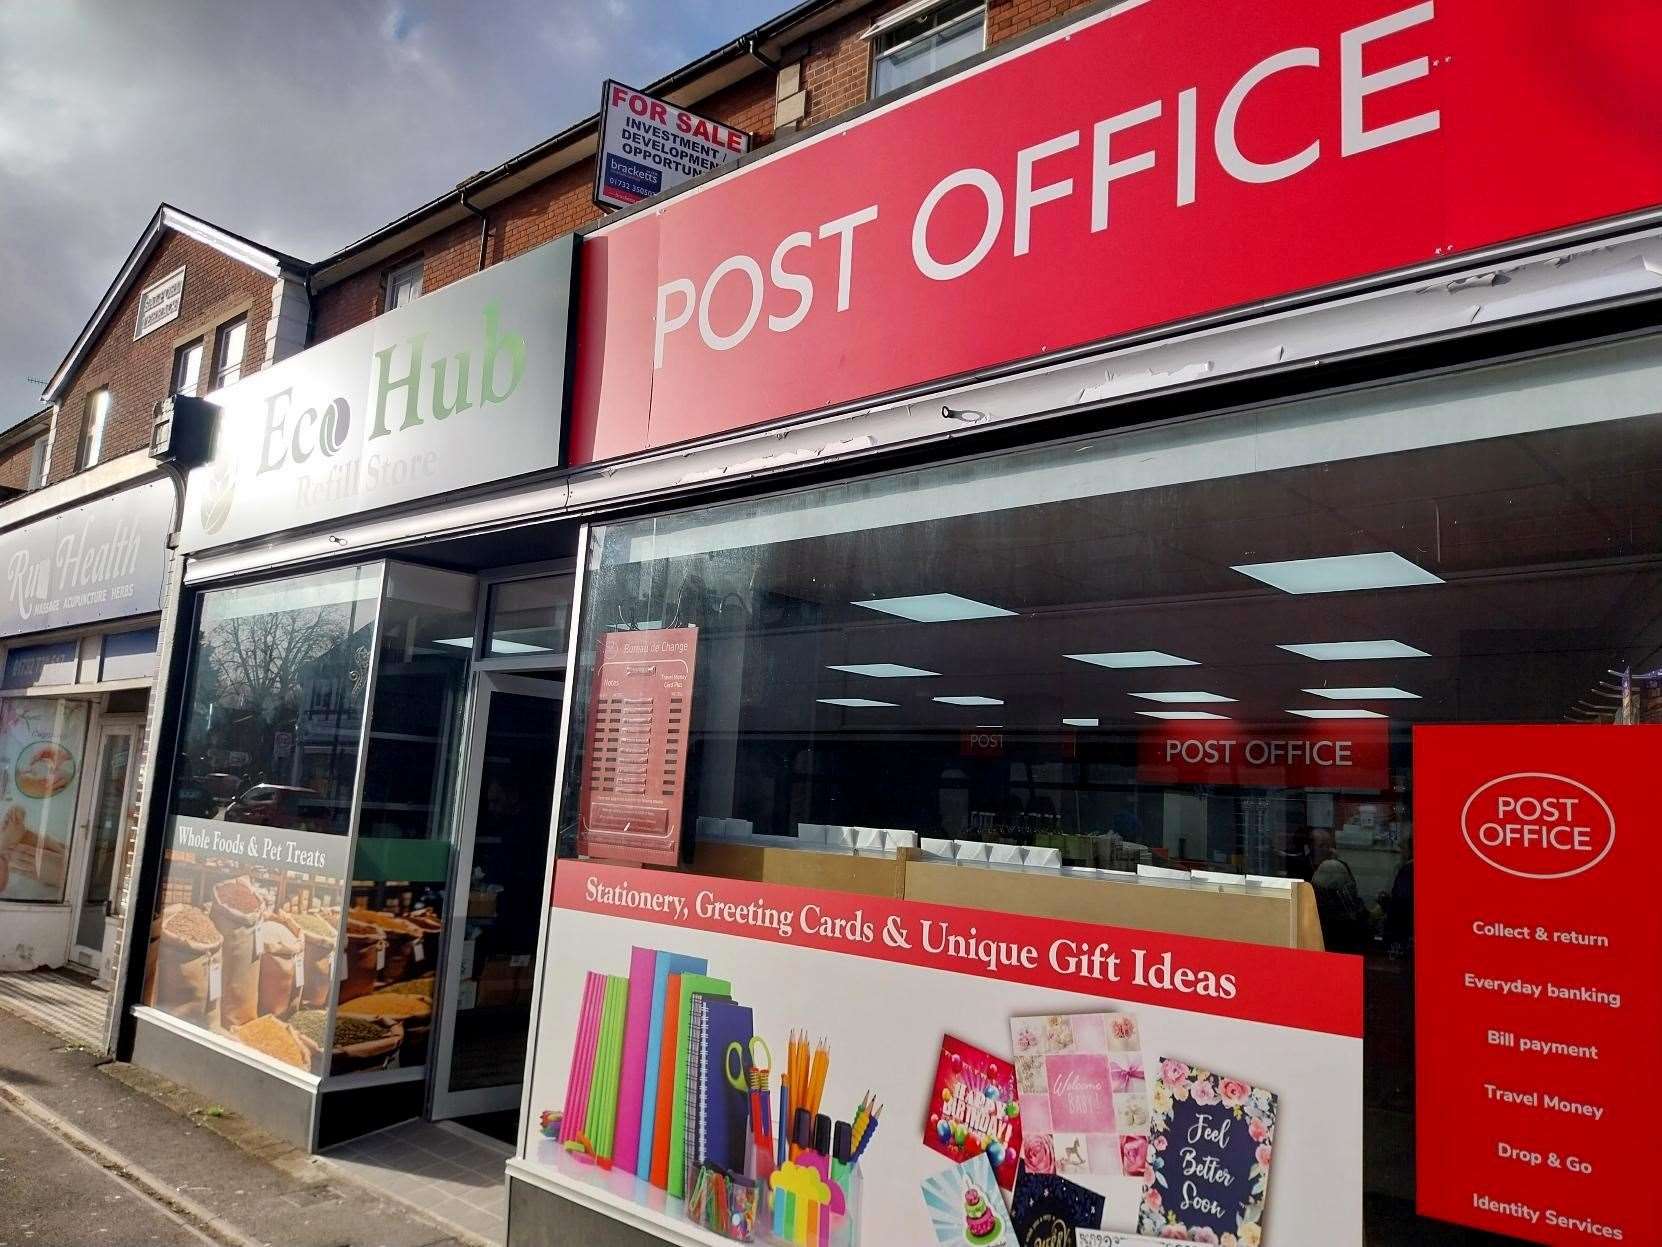 Tonbridge residents will now have a more accessible Post Office branch. Picture: Post Office